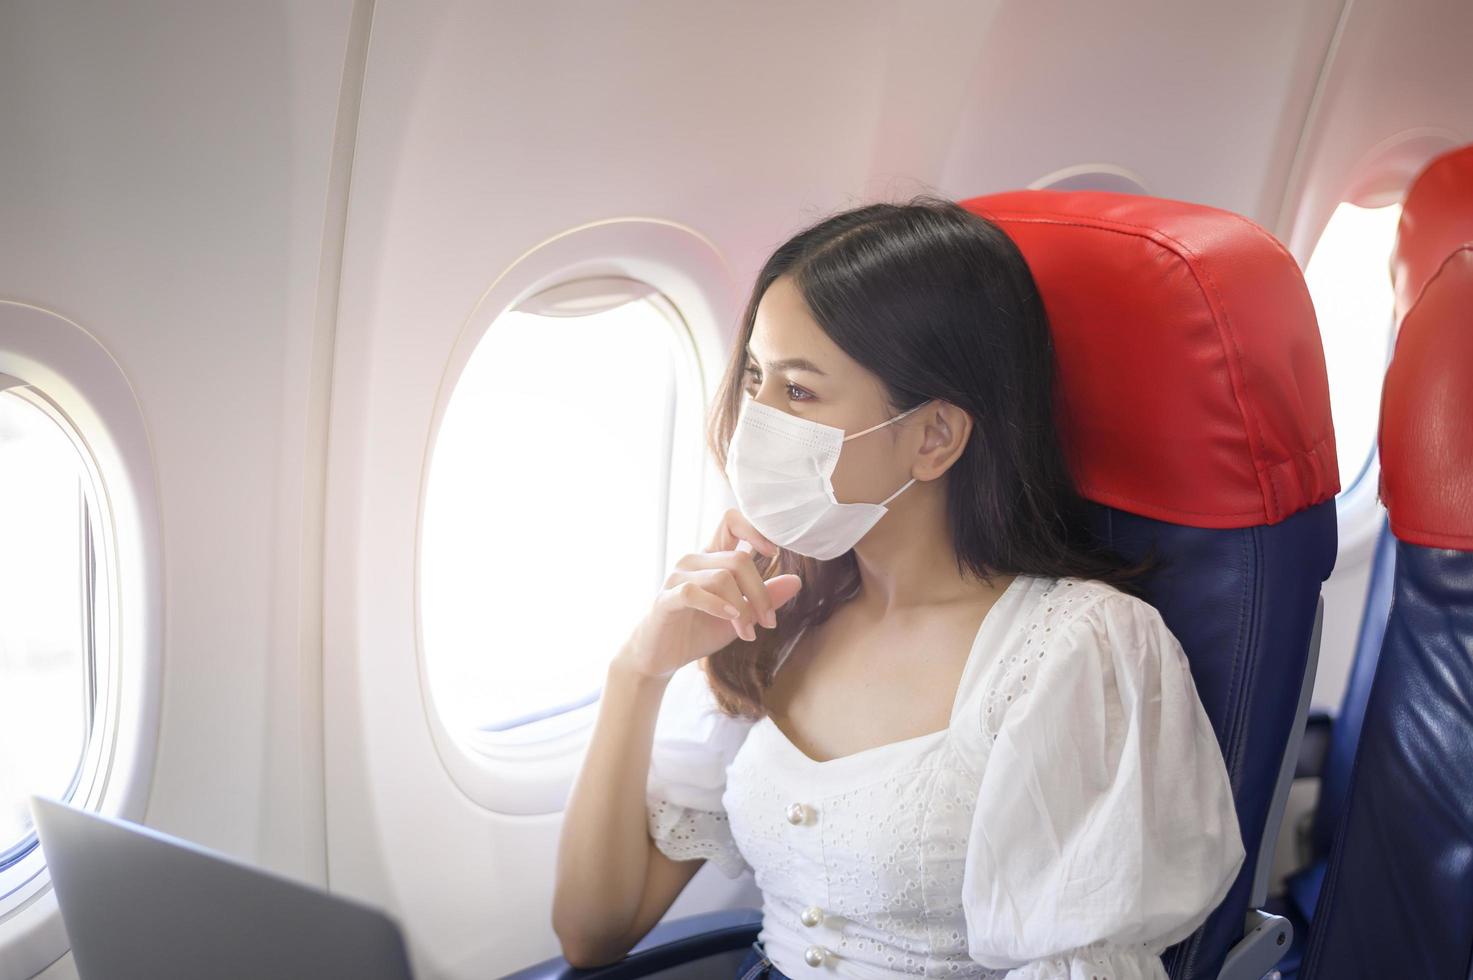 A young woman wearing face mask is using laptop onboard, New normal travel after covid-19 pandemic concept photo